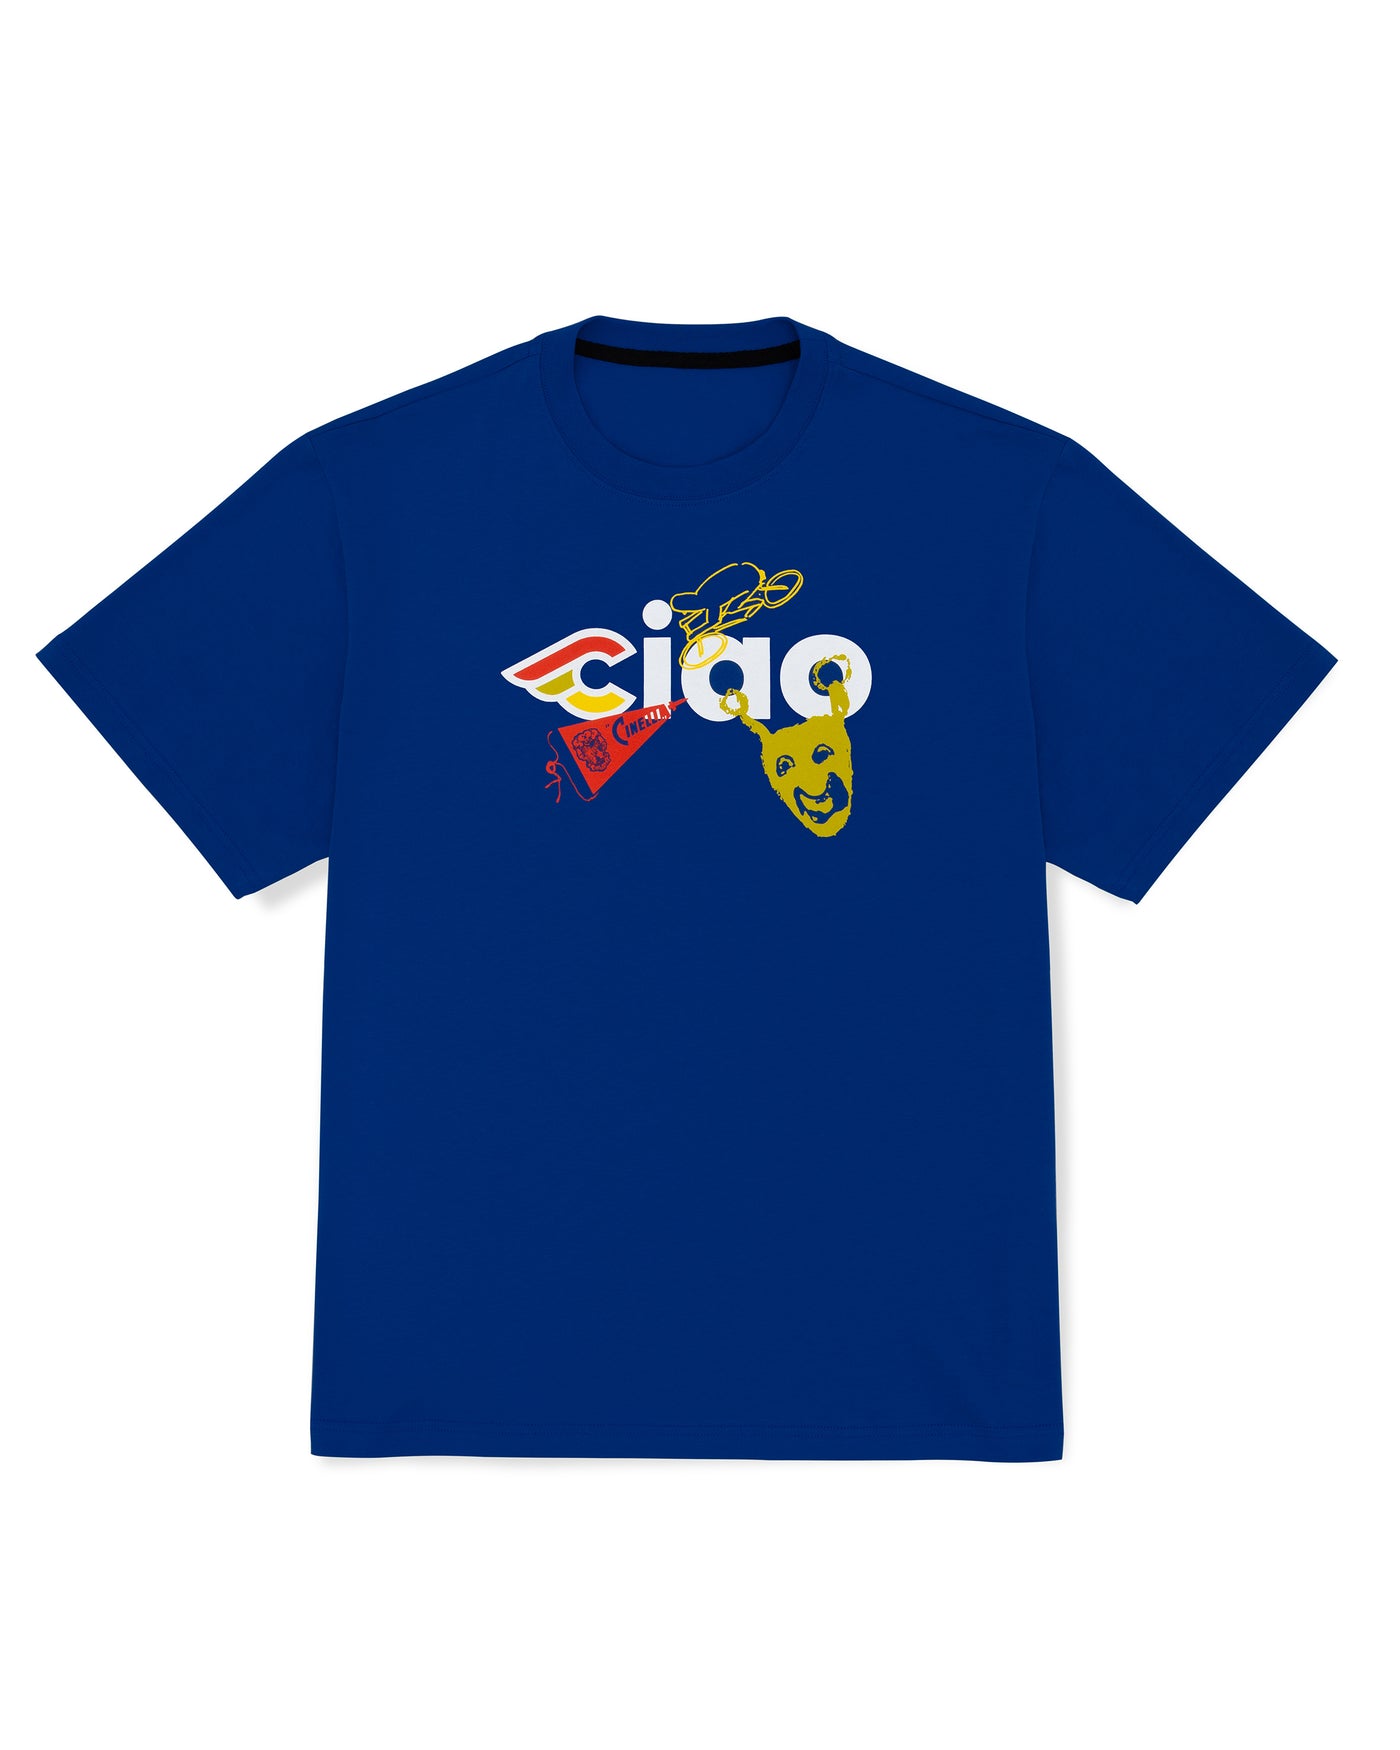 T-SHIRT CIAO ICONS BLUE NAVY